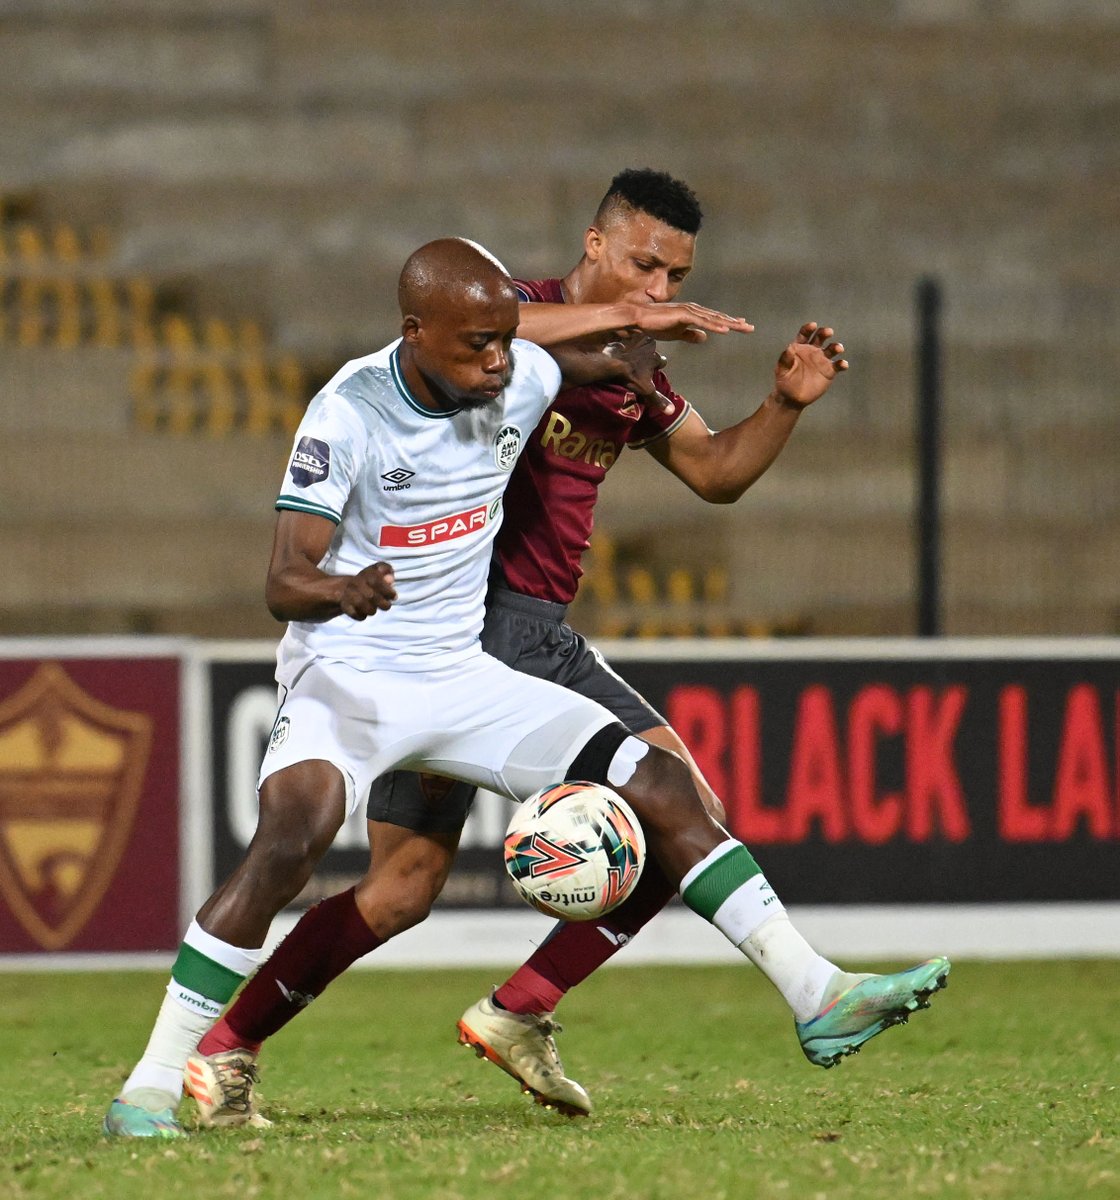 HALF-TIME ⏰ | #DStvPremiership 🏆 No goals after the first forty-five minutes. All to play for in the second half of this one. Stellenbosch 0⃣ ➖ 0⃣ #AmaZuluFC #Indlulamithi #HebeUsuthu #UsuthuTogether